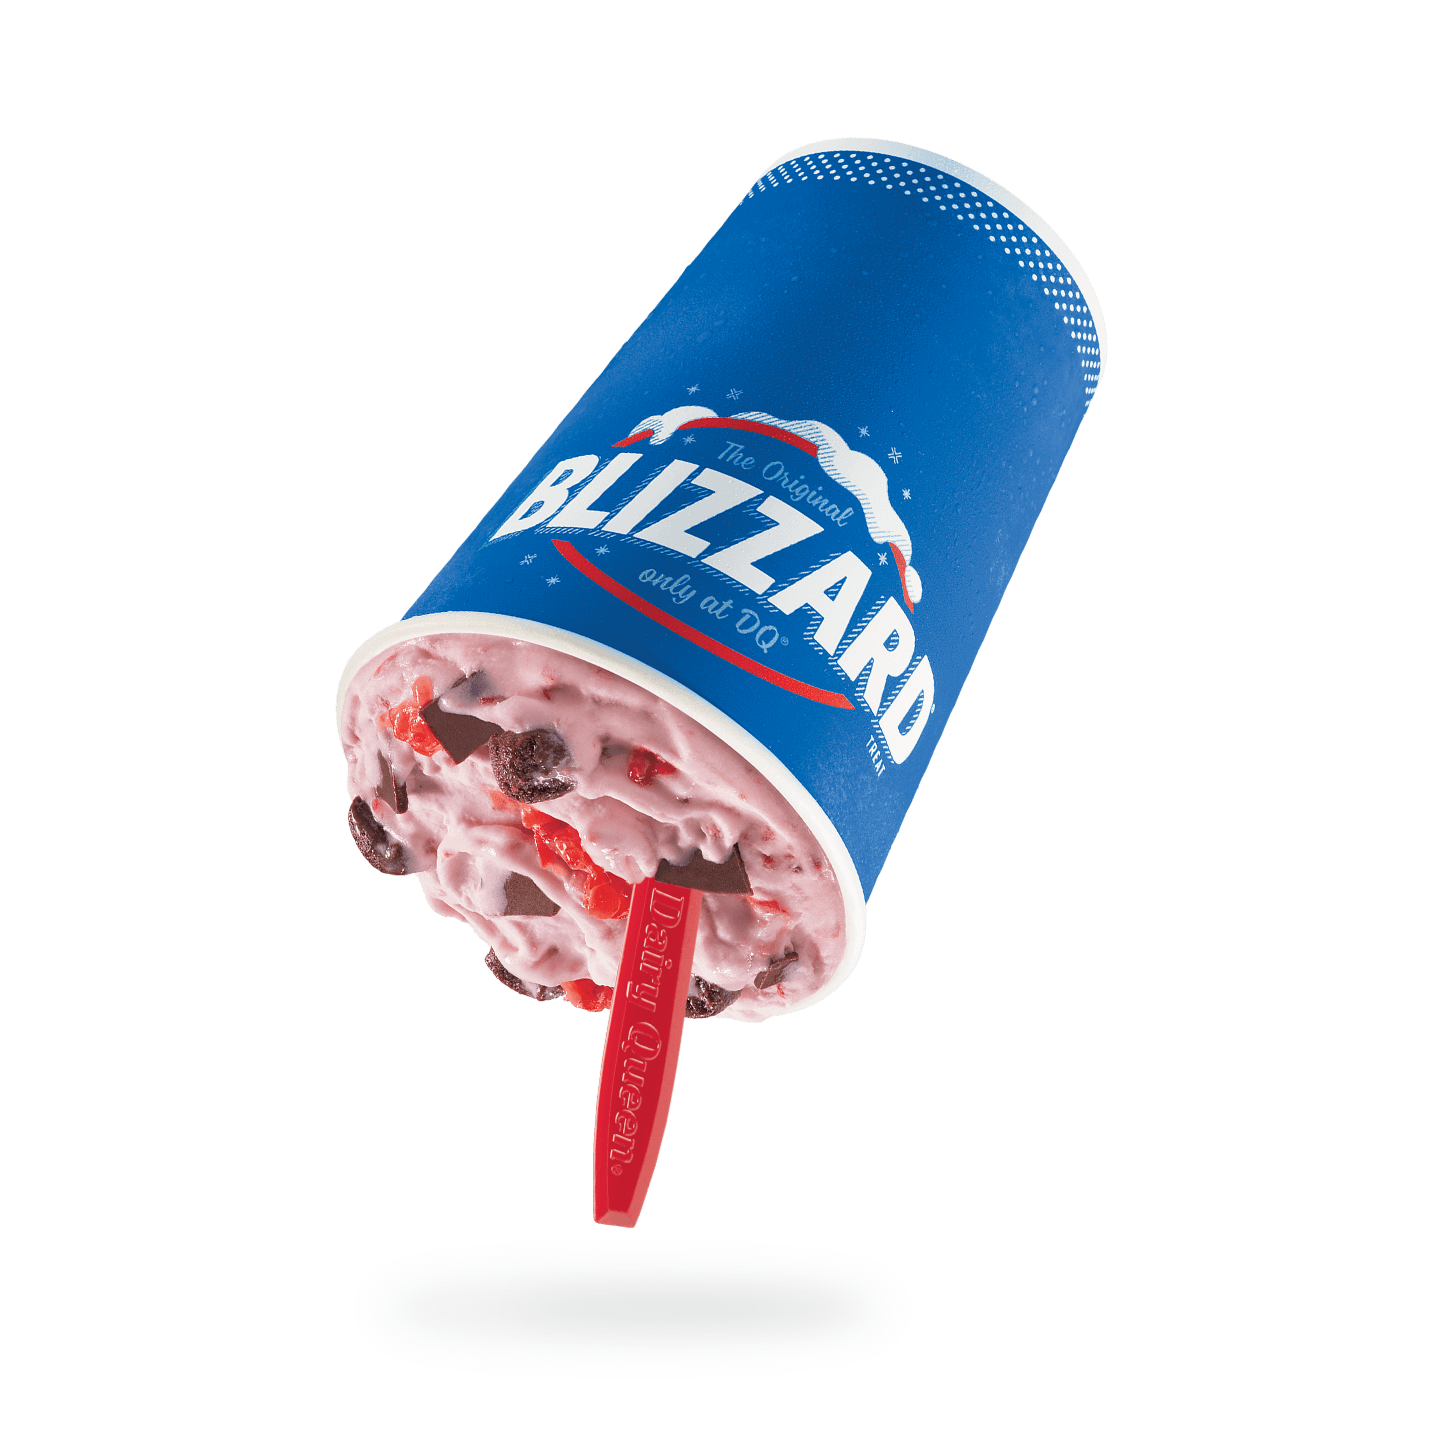 Dairy Queen Raspberry Fudge Bliss Blizzard Nutrition Facts